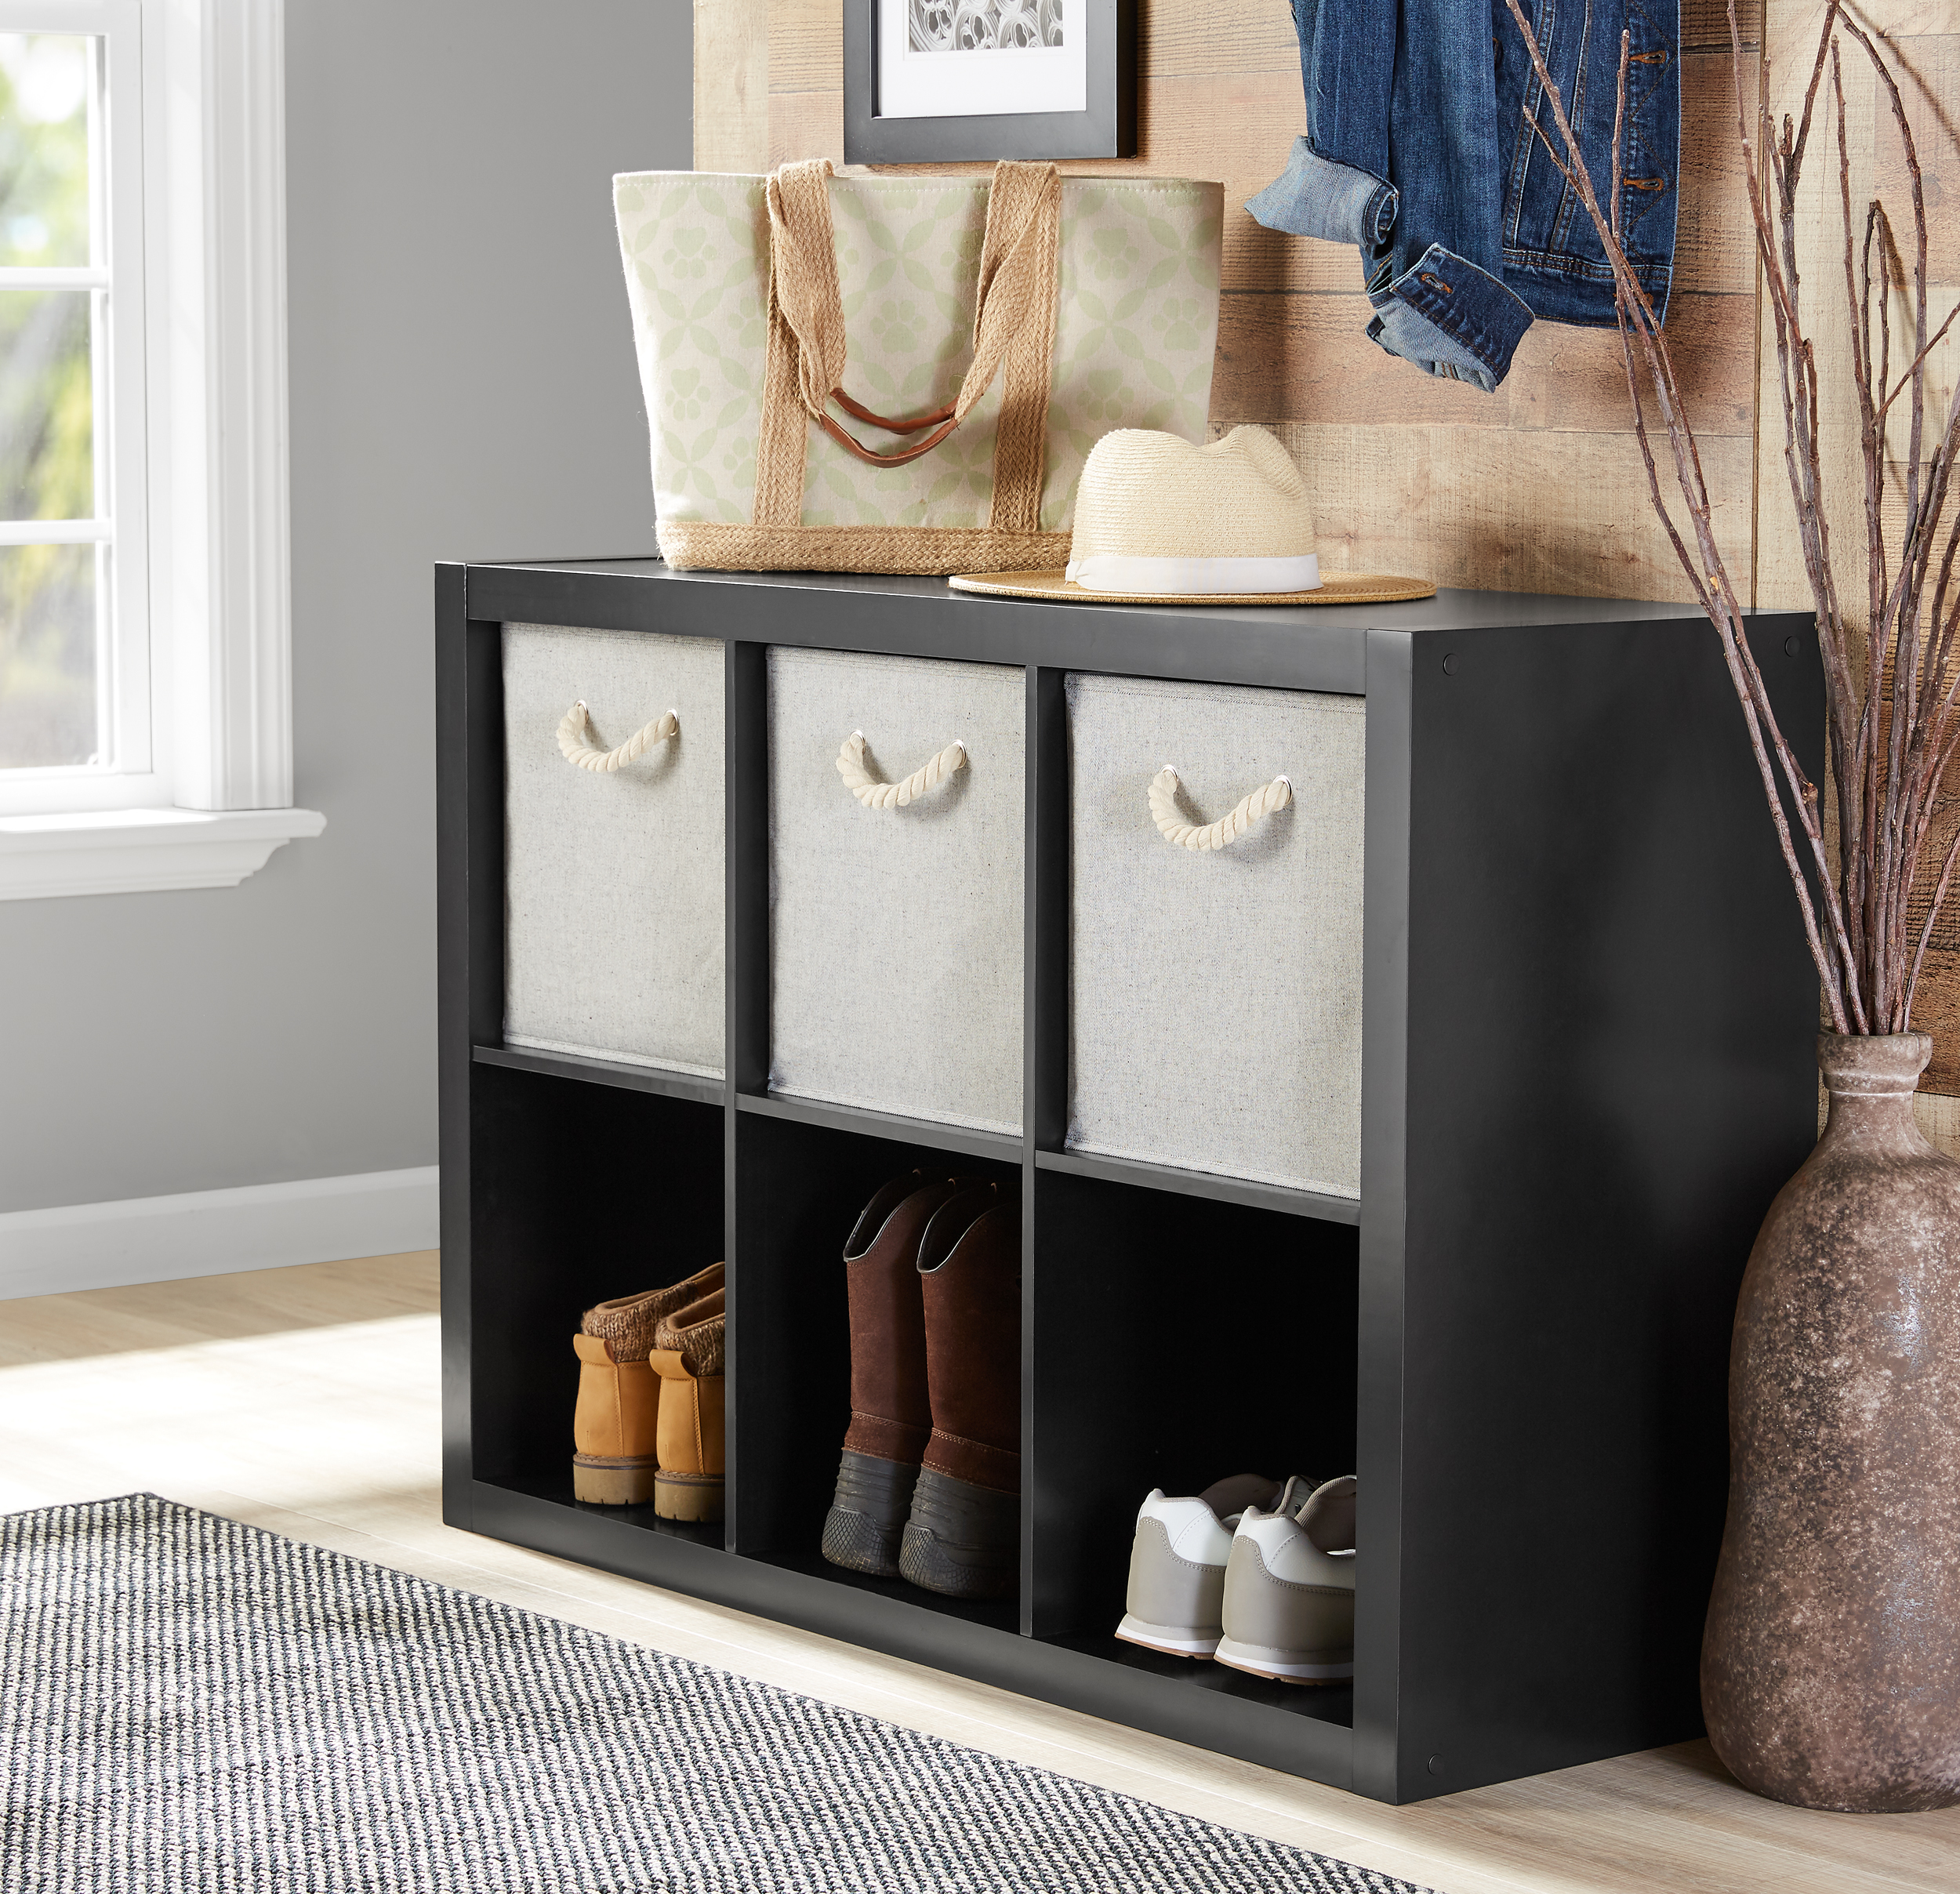 Better Homes & Gardens 6-Cube Storage Organizer, Solid Black - image 3 of 9